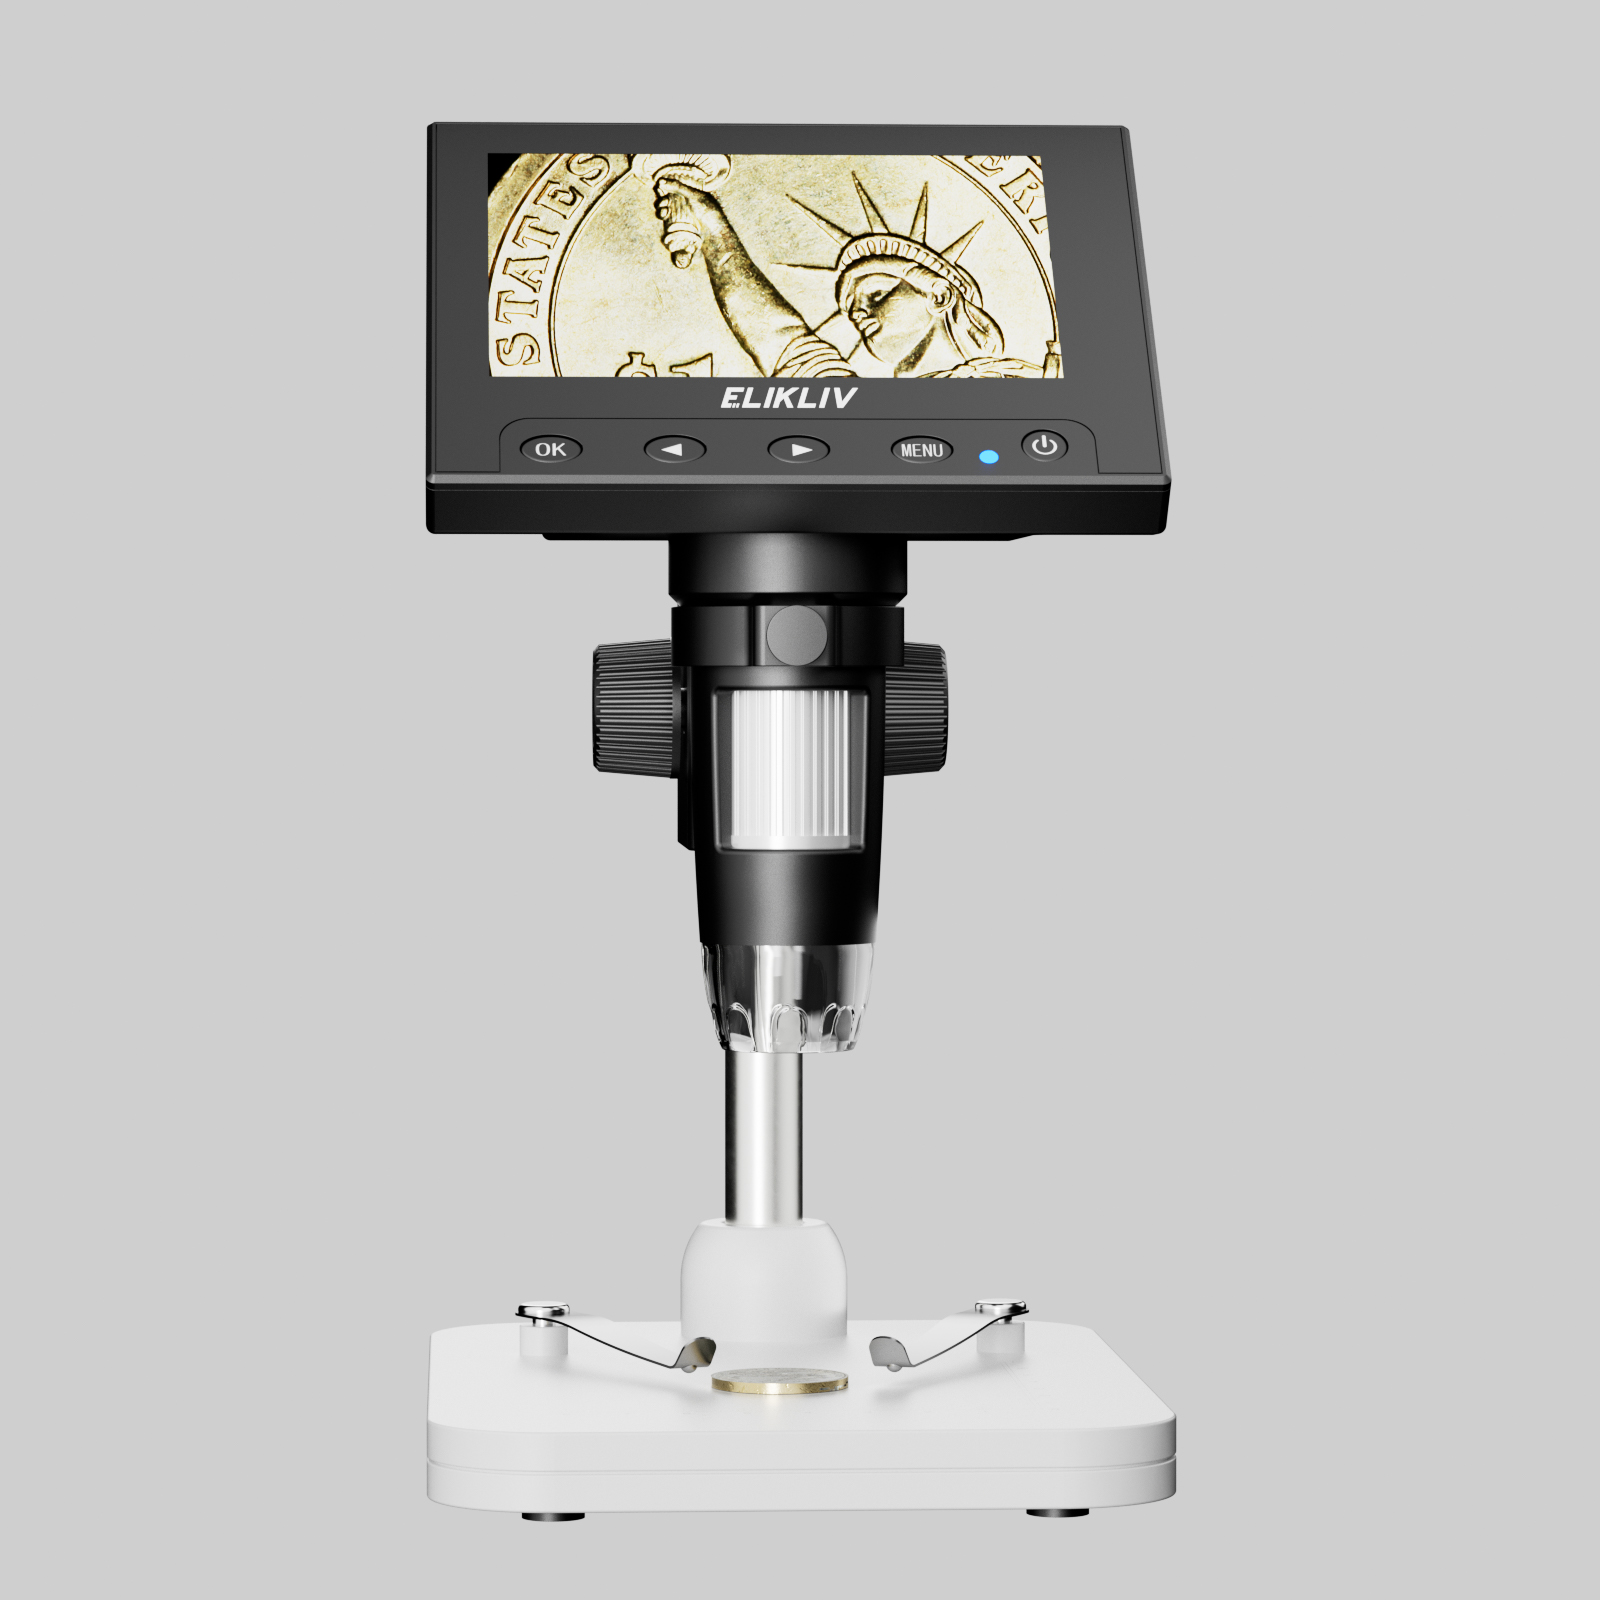 LP043H 4.3 Inch Coin Microscope with HDMI, Leipan 1000X LCD Digital  Microscope for Adults,1080P Coin Magnifier Taking Photo/Video with 8